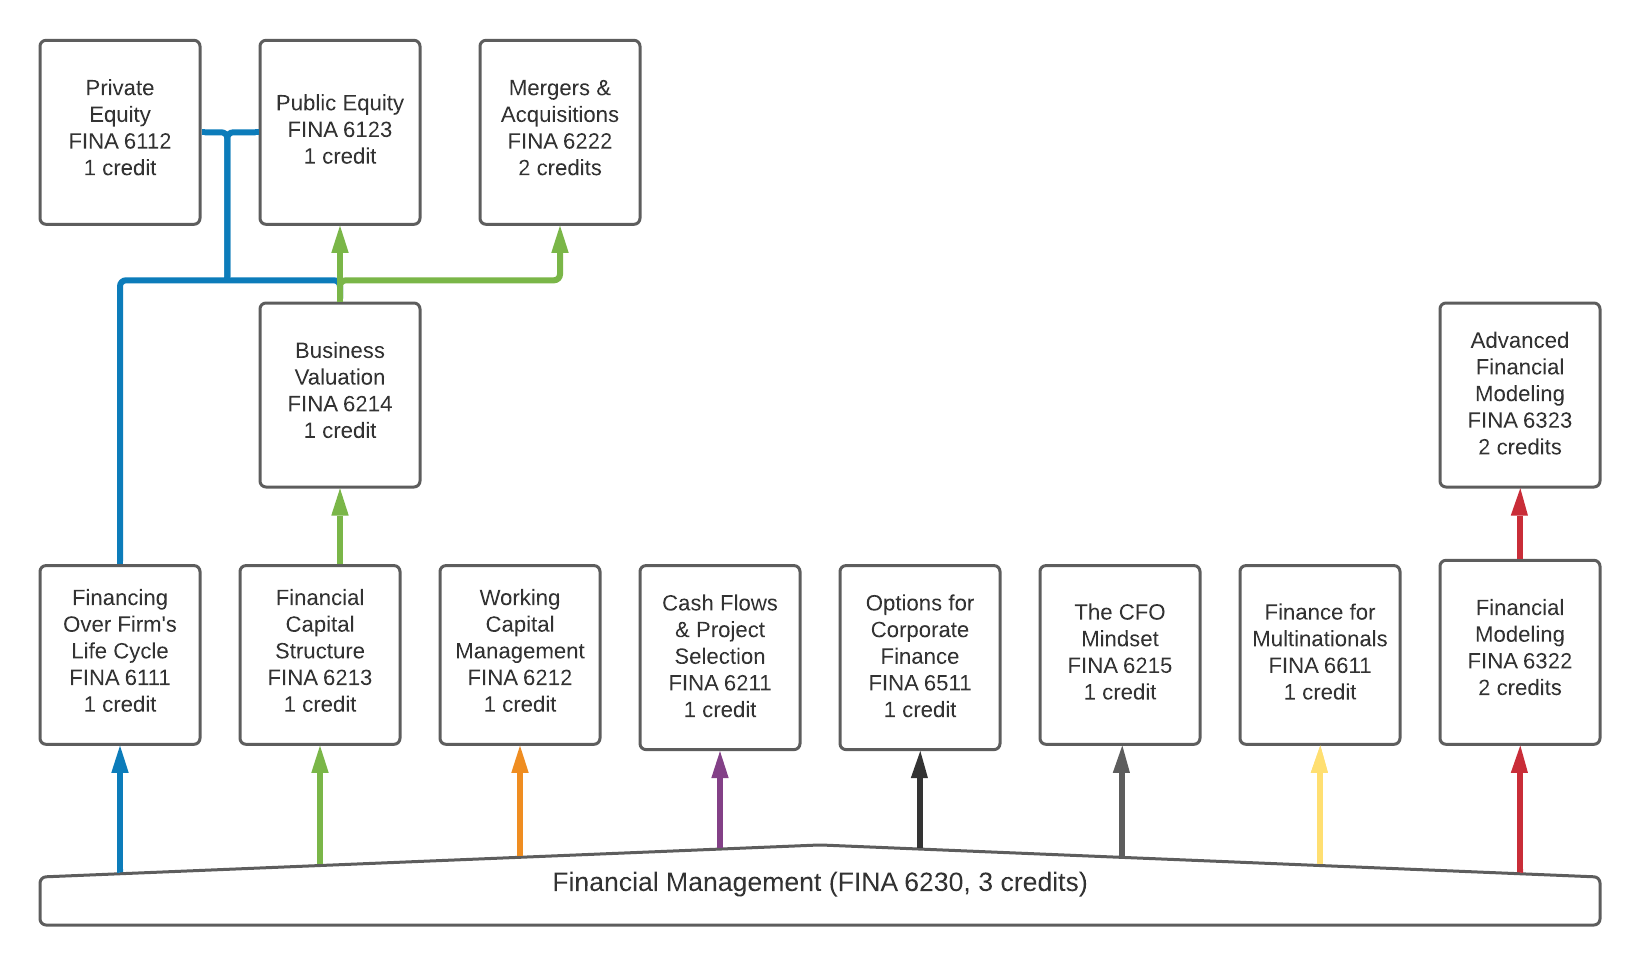 a flow chart depicting various paths through MBA FINA courses